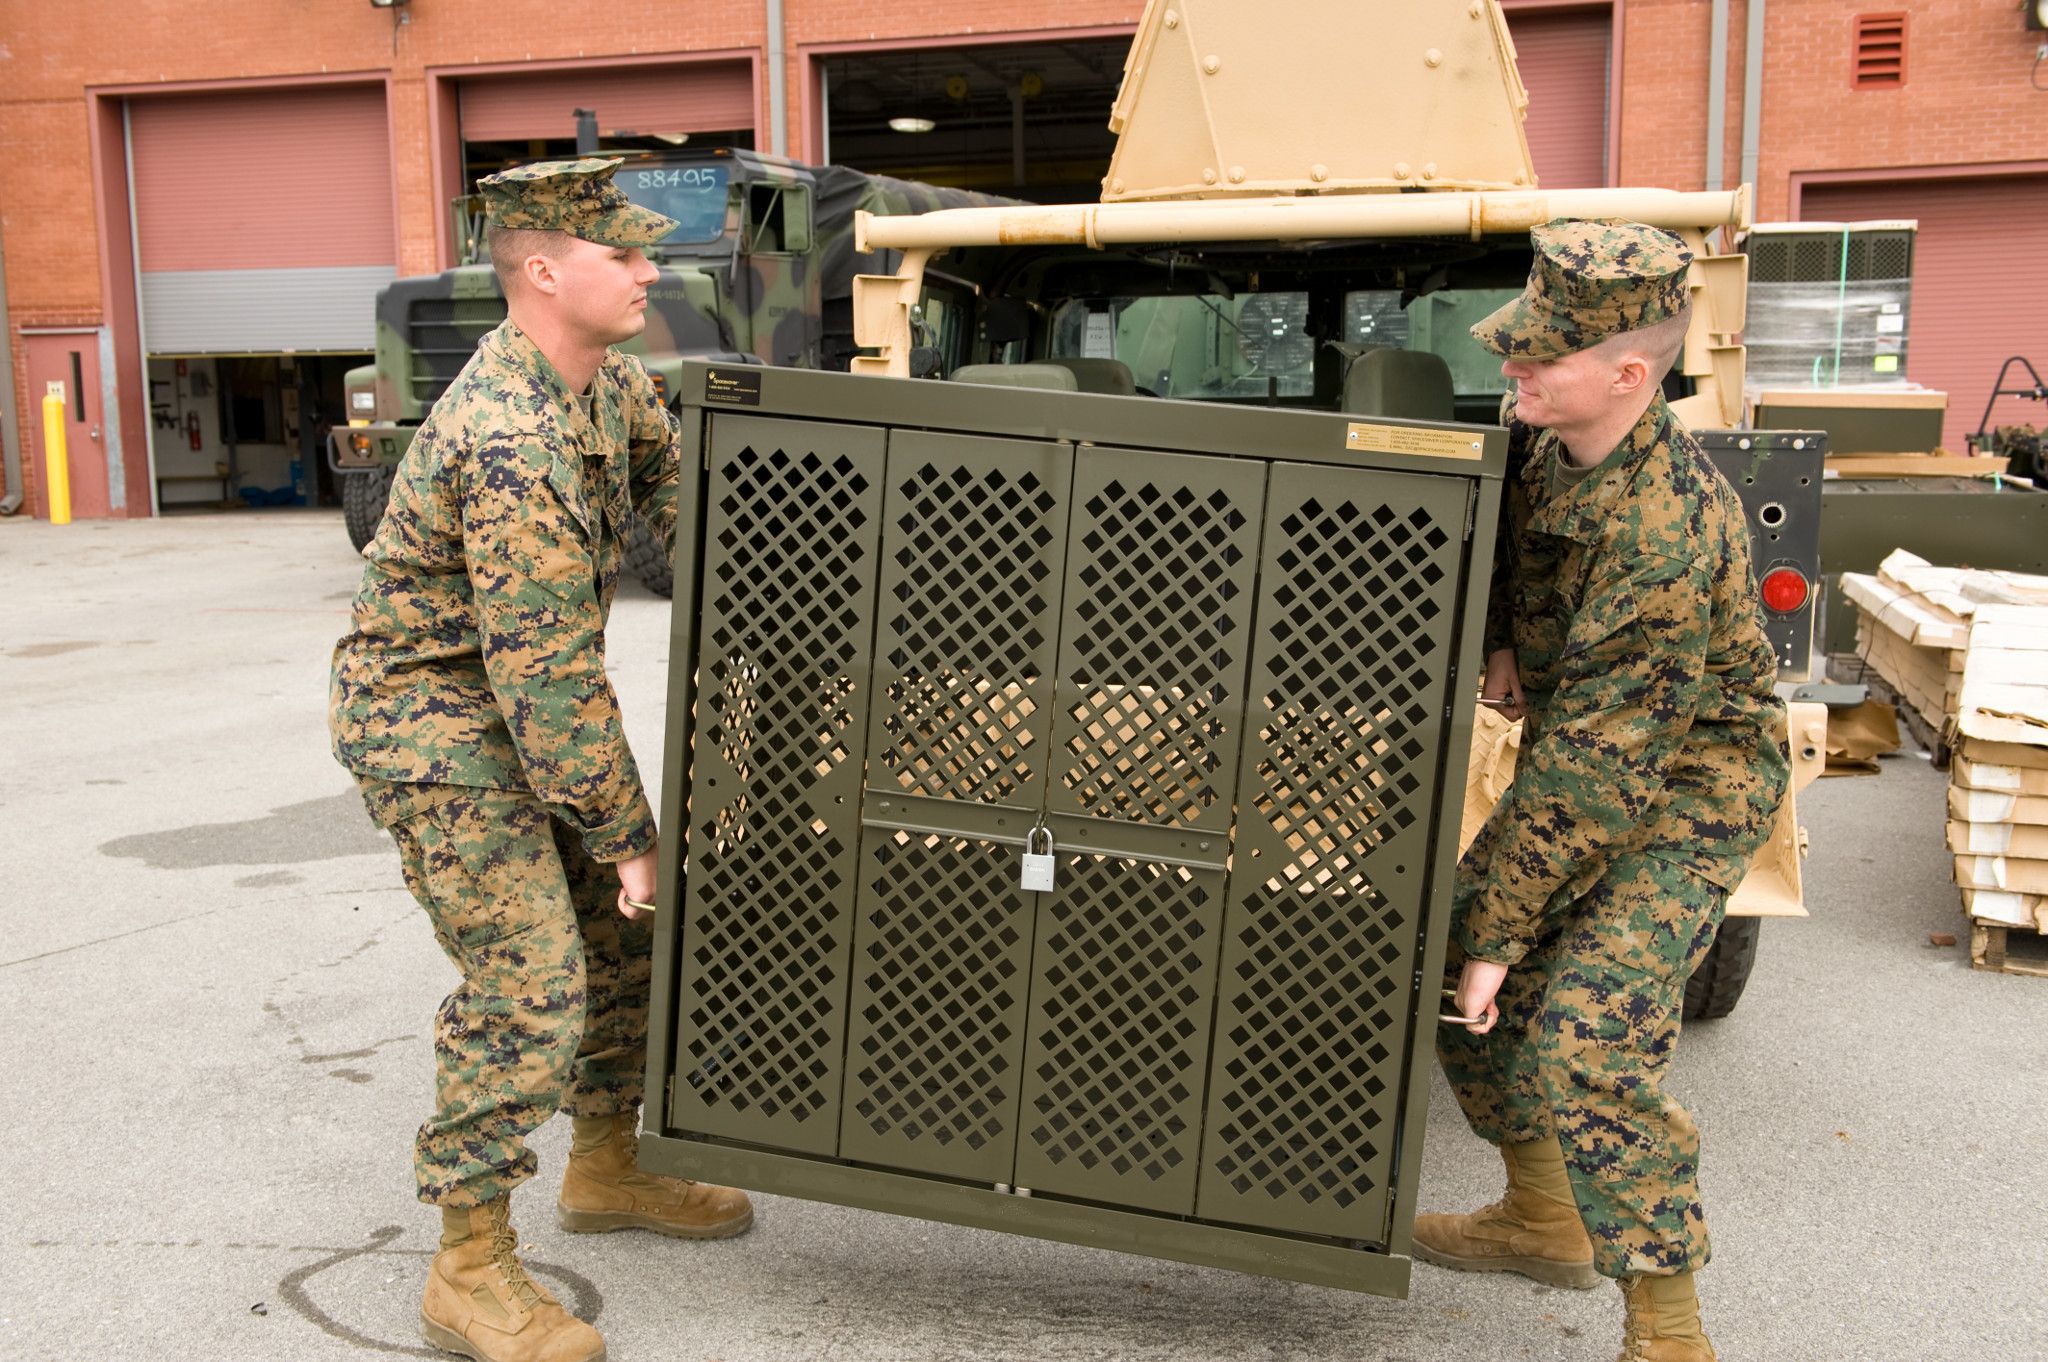 Military Storage - Transportable and secure weapons storage system